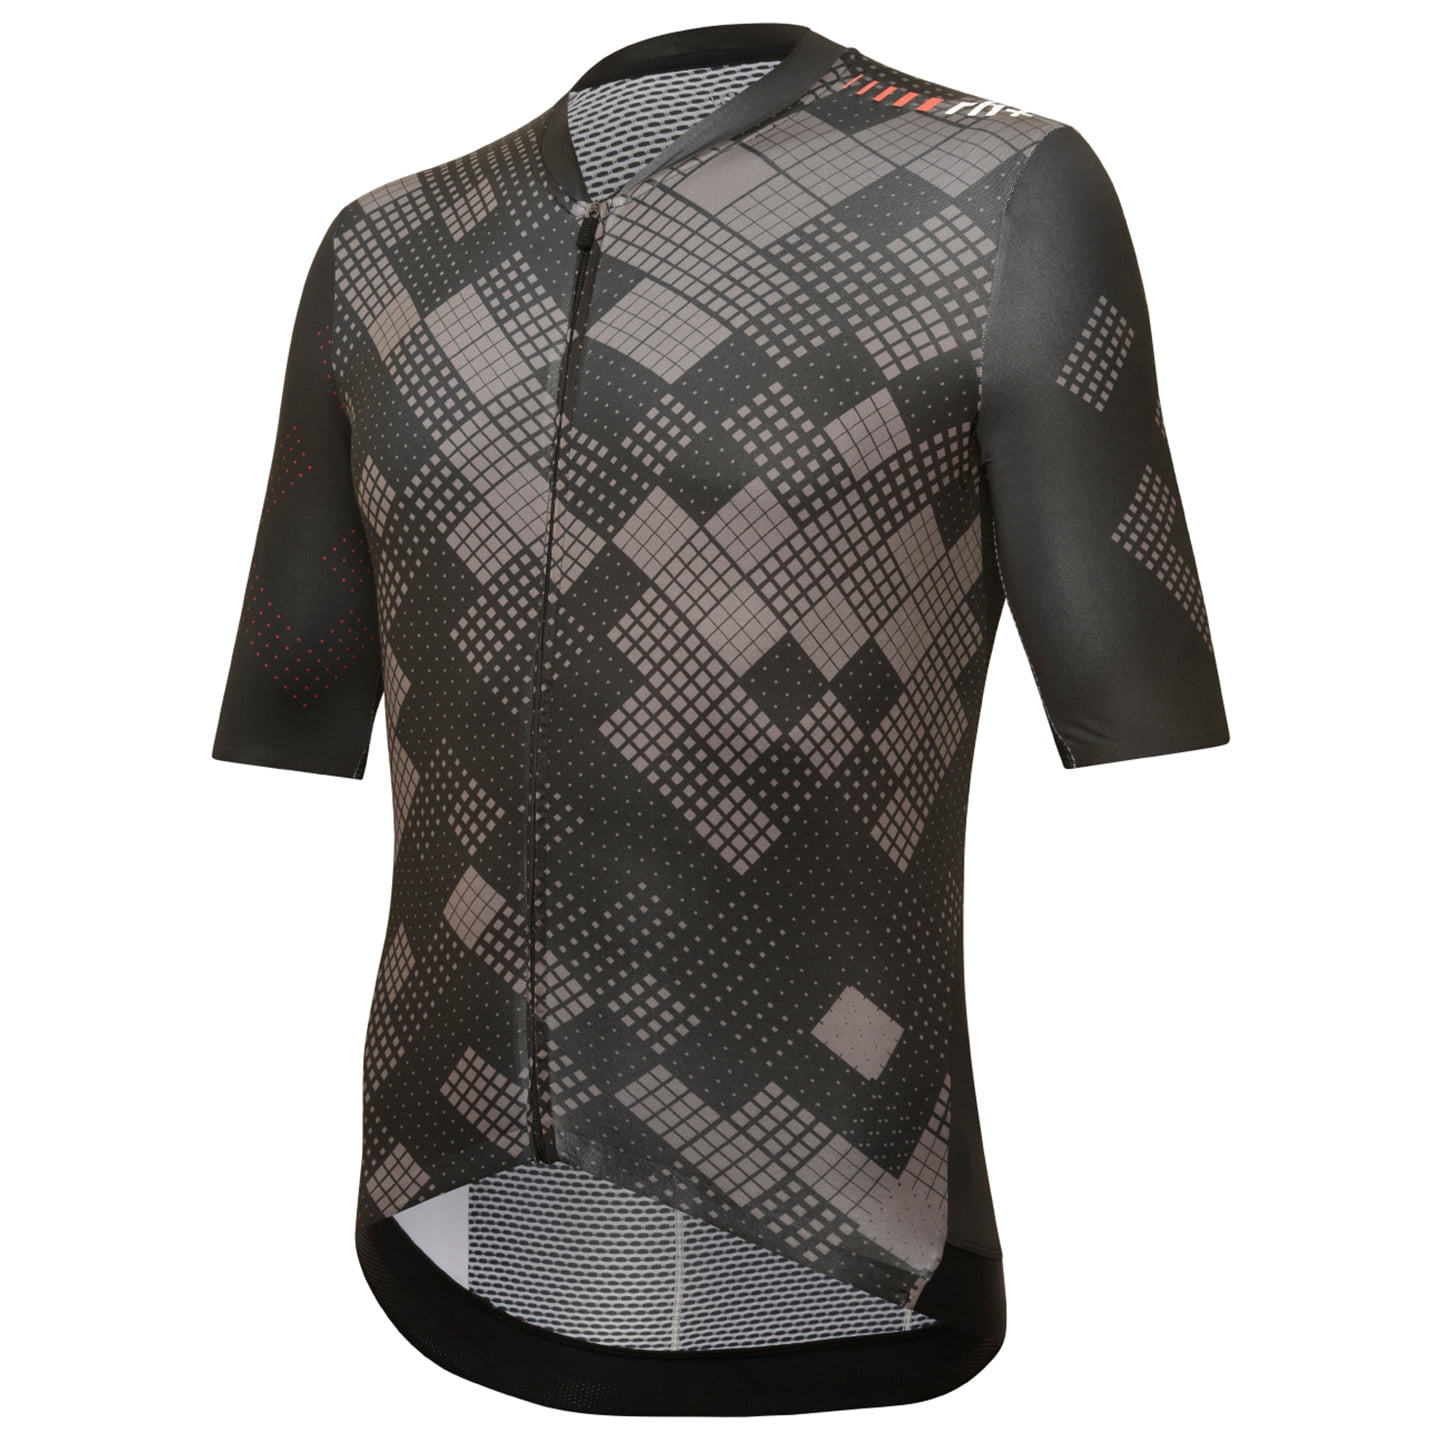 rh+ Diamond Short Sleeve Jersey Short Sleeve Jersey, for men, size 2XL, Cycling jersey, Cycle clothing